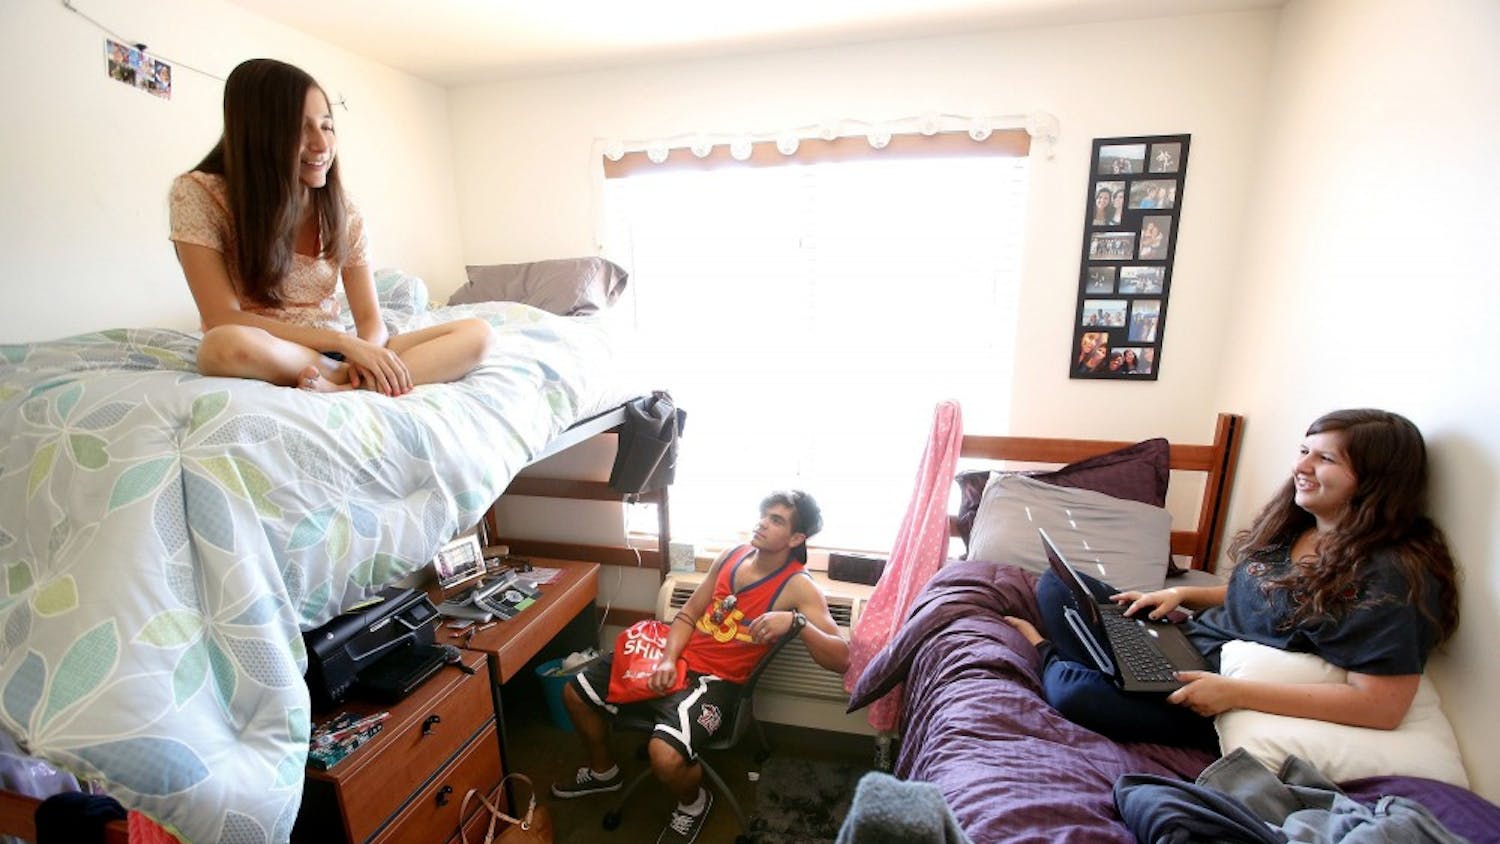 Shelby Ryan, 18, left, from Sherman Oaks, a freshman at Cal State Northridge, and her roommate Abby Souza, 18, right, from Davis, hang out inside their dorm room with Austin Garcia, 18, from Bakersfield, who was visiting from his room located down the hall of the coed dorm, August 26, 2013.  All three students are freshmen. (Mel Melcon/Los Angeles Times/MCT)